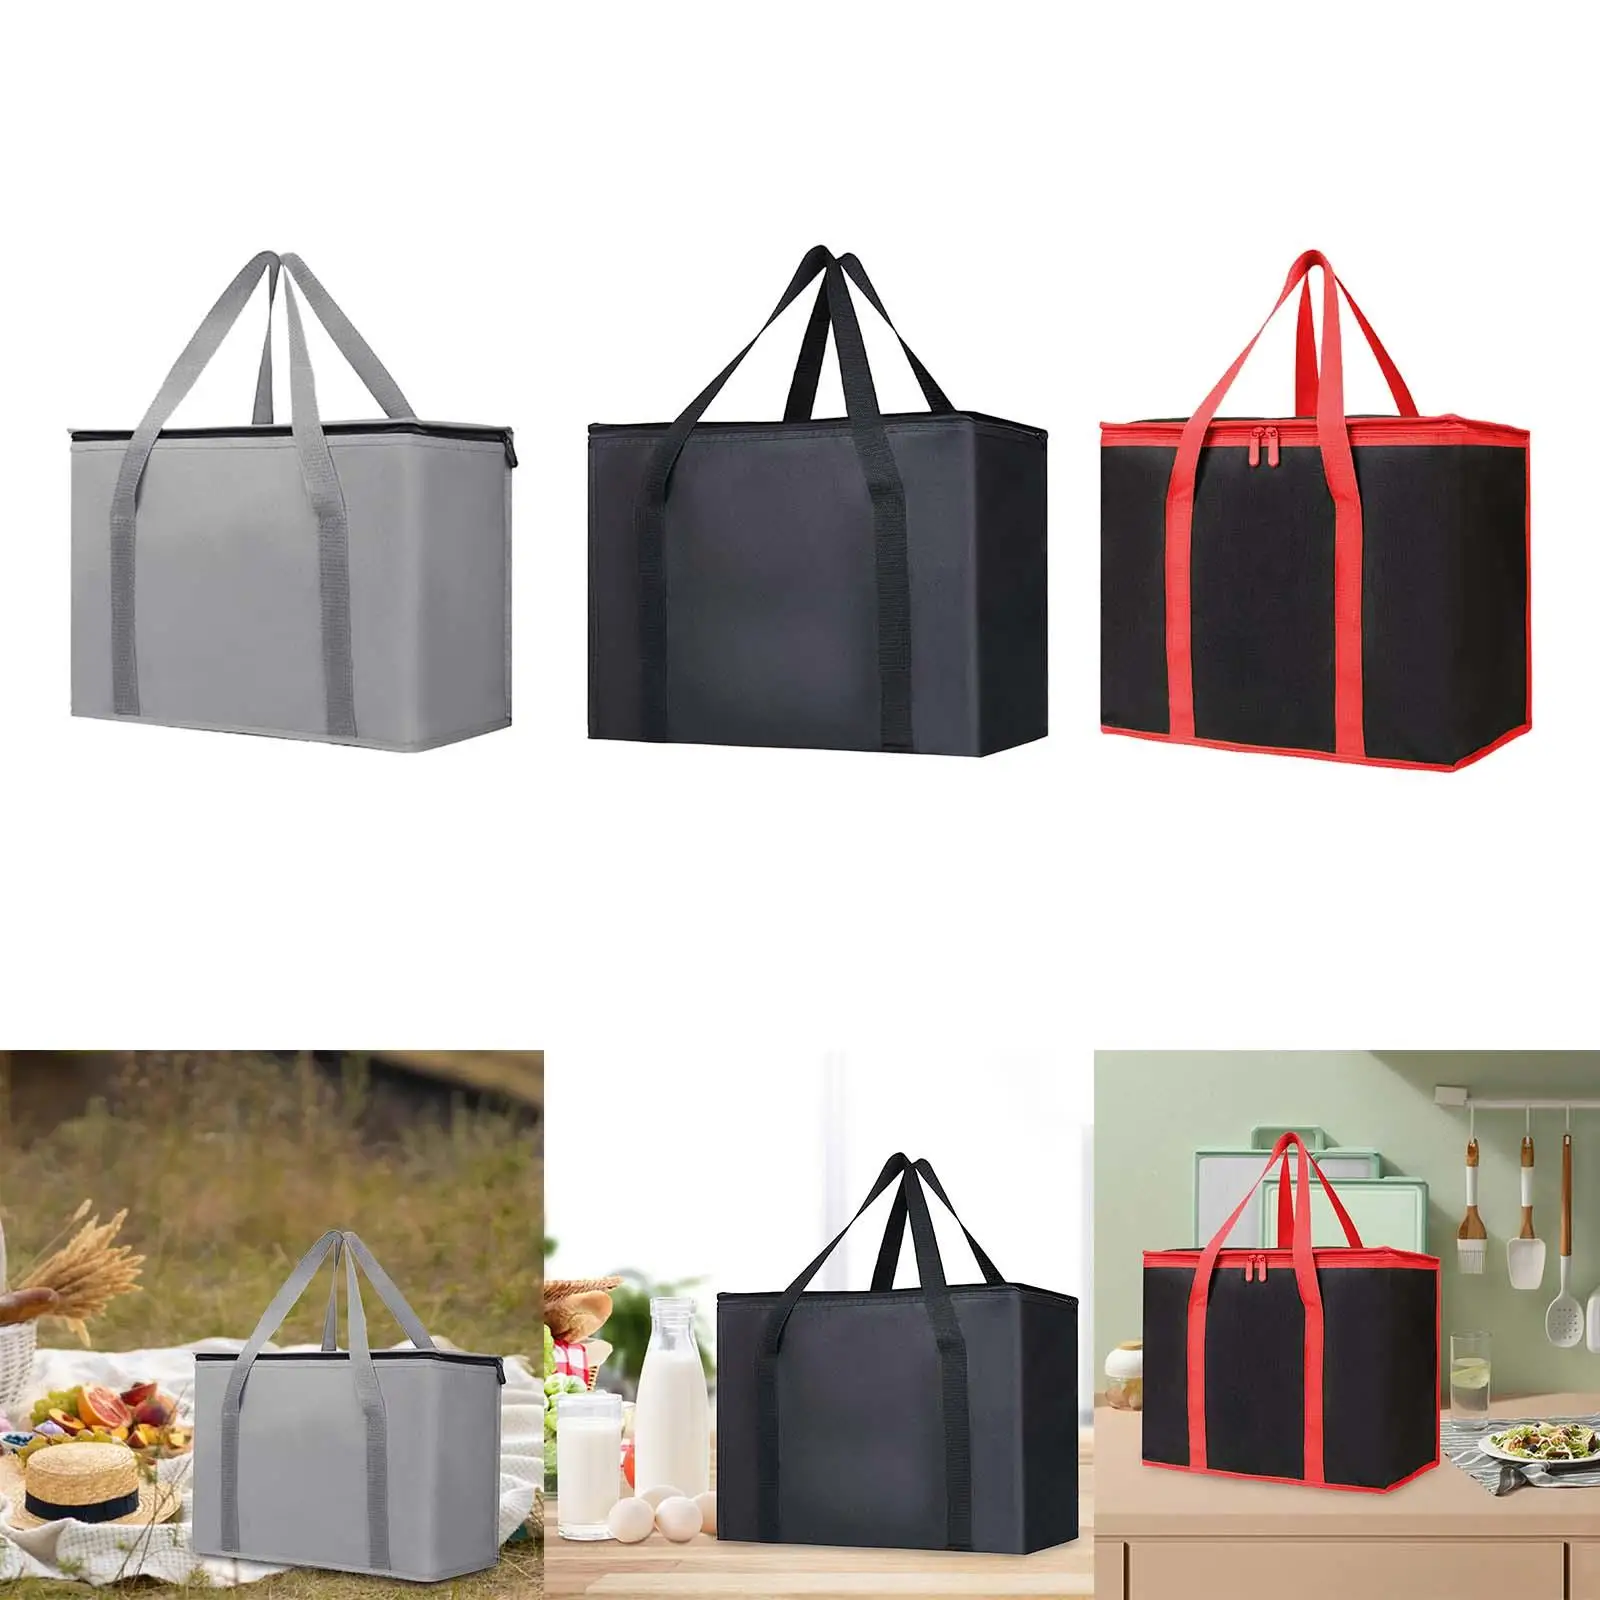 Insulated Cooler Bag Thermal Reusable Non Woven Insulated Bag Grocery Shopping Bag for Outdoor Fishing Beach Picnic Travel